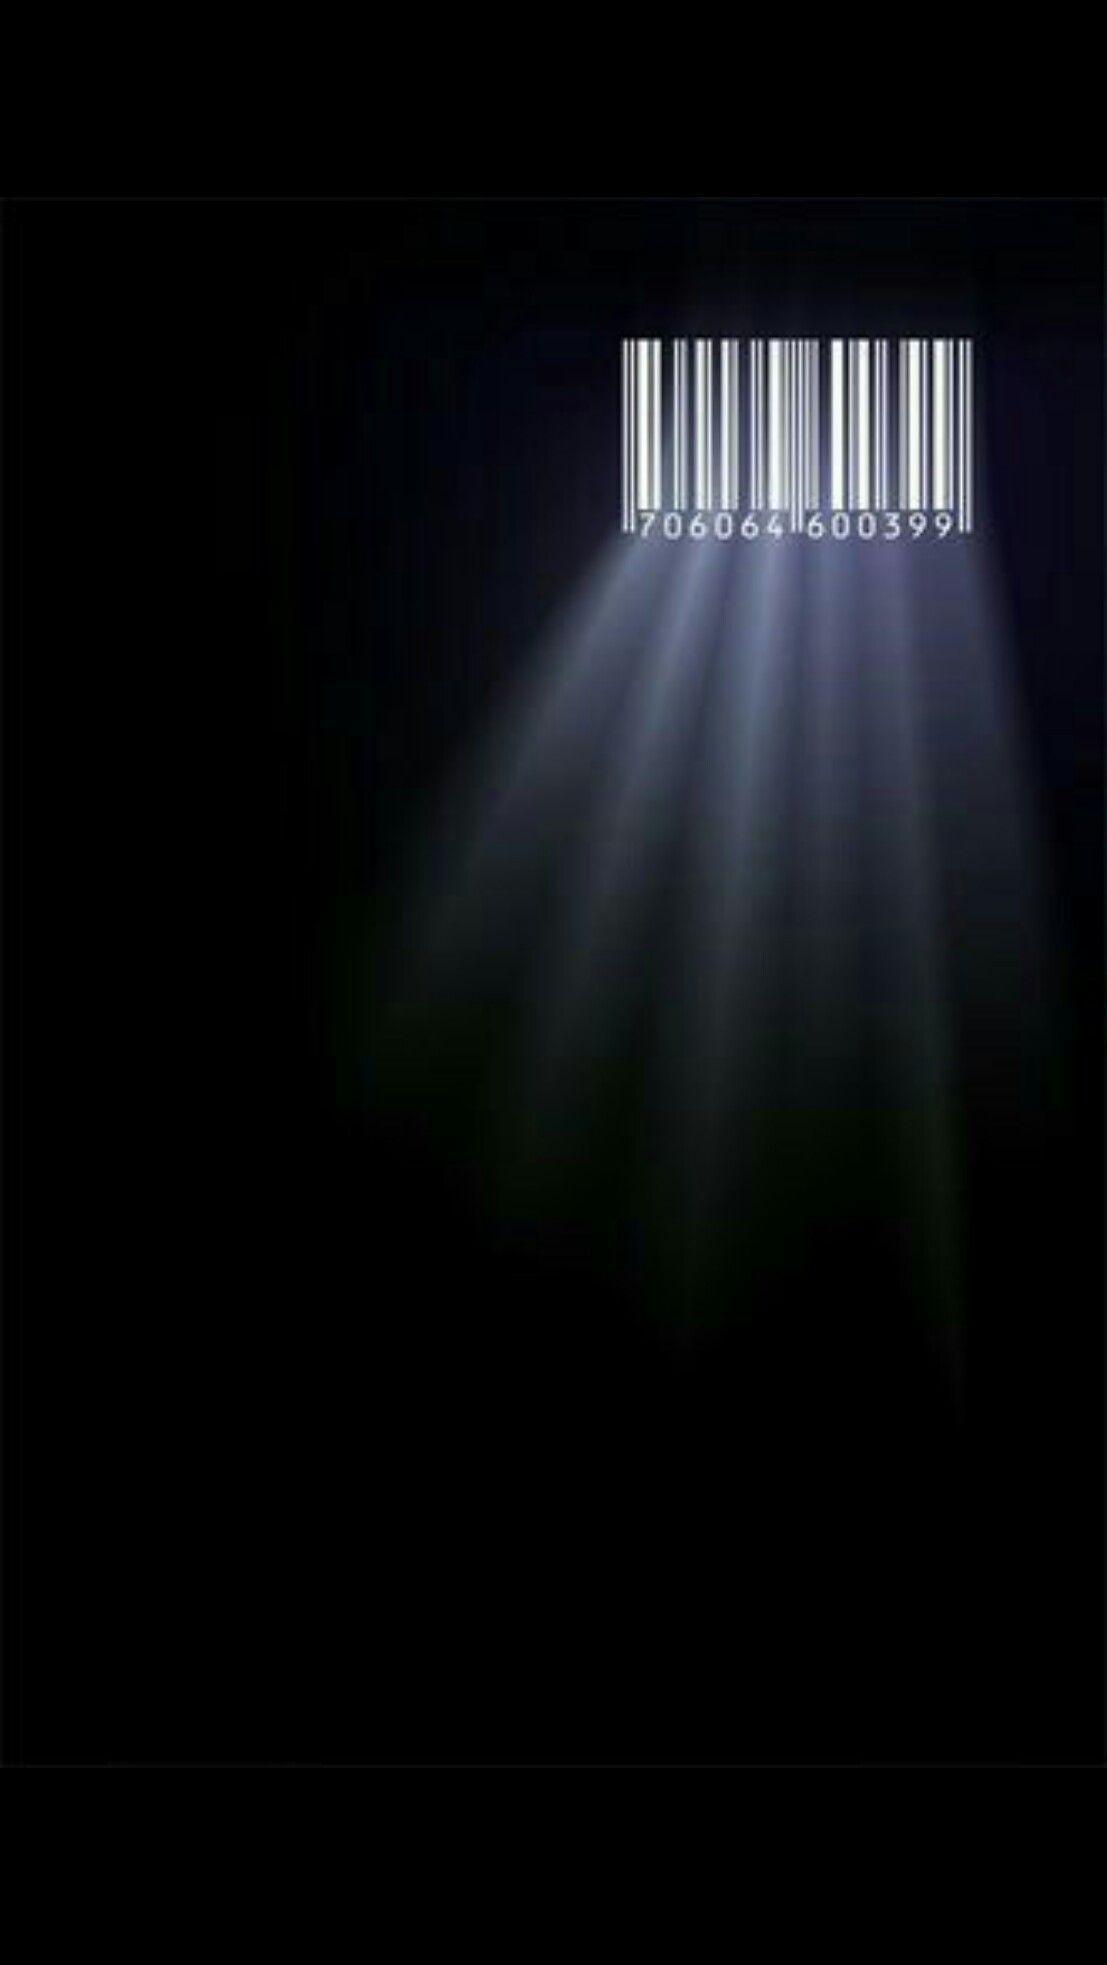 barcode #black #wallpaper #android #iphone. Wallpaper